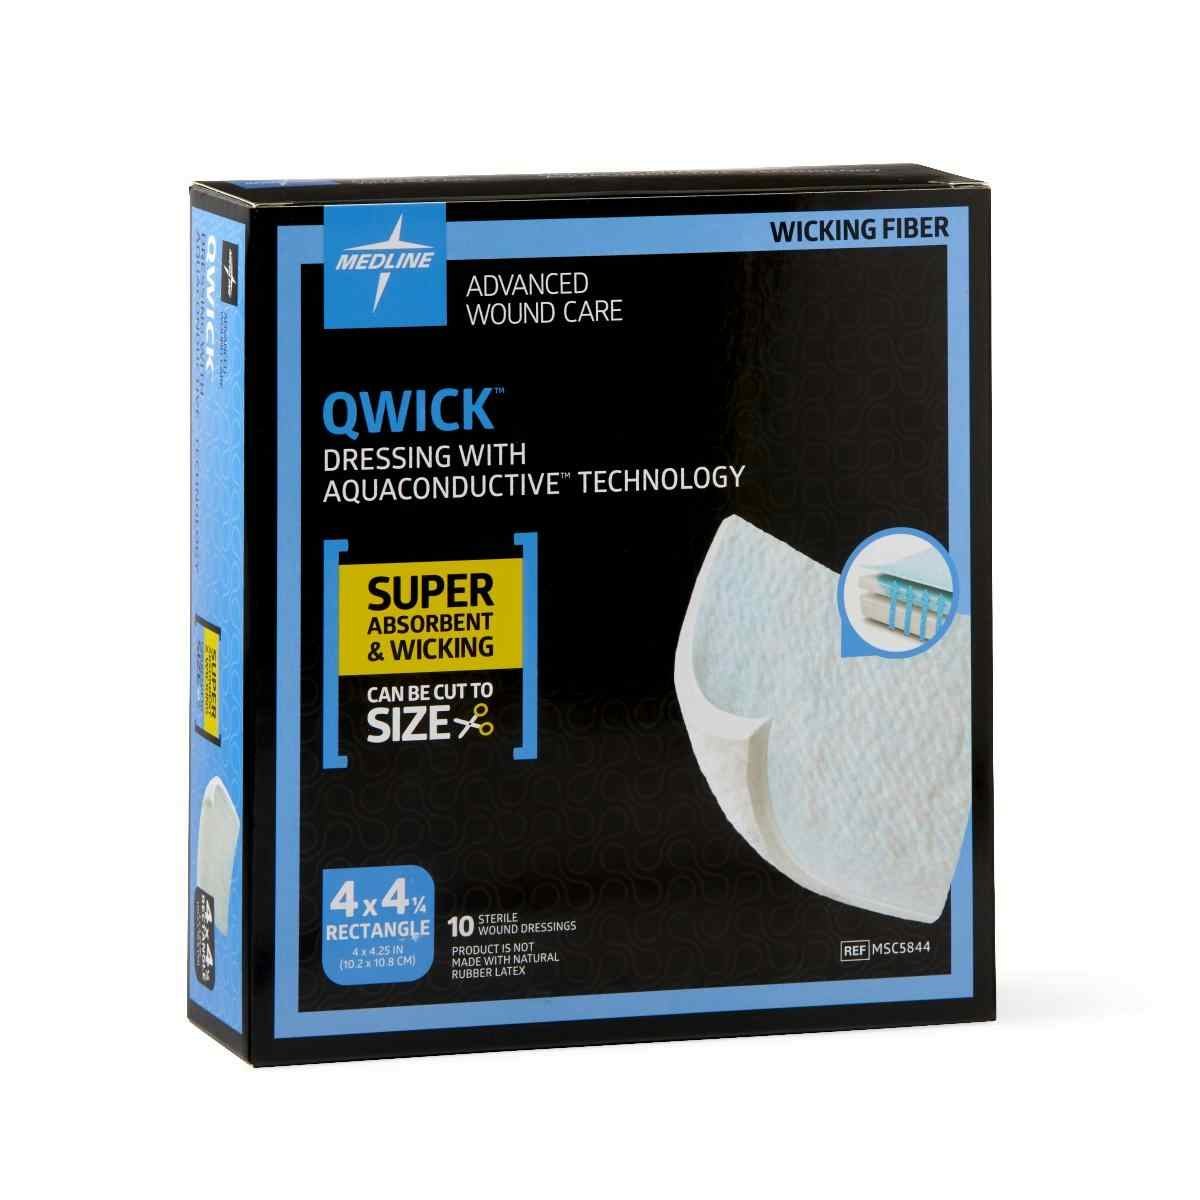 Medline Qwick Non-Adhesive Wound Dressing with Aquaconductive Technology, MSC5844Z, 4" X 4 1/4" - Box of 10